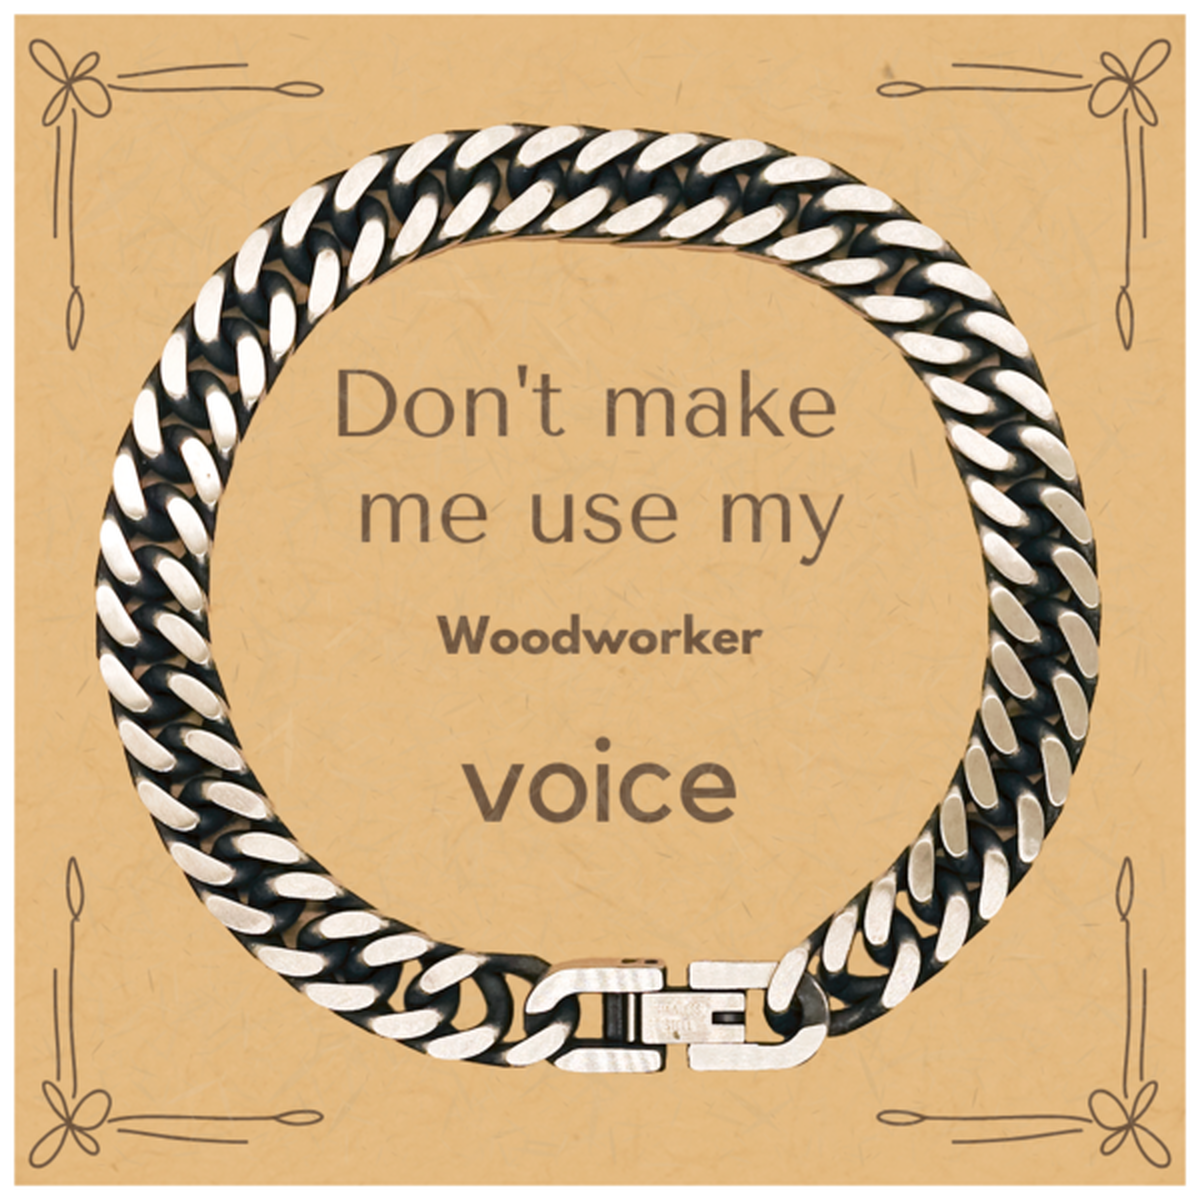 Don't make me use my Woodworker voice, Sarcasm Woodworker Card Gifts, Christmas Woodworker Cuban Link Chain Bracelet Birthday Unique Gifts For Woodworker Coworkers, Men, Women, Colleague, Friends